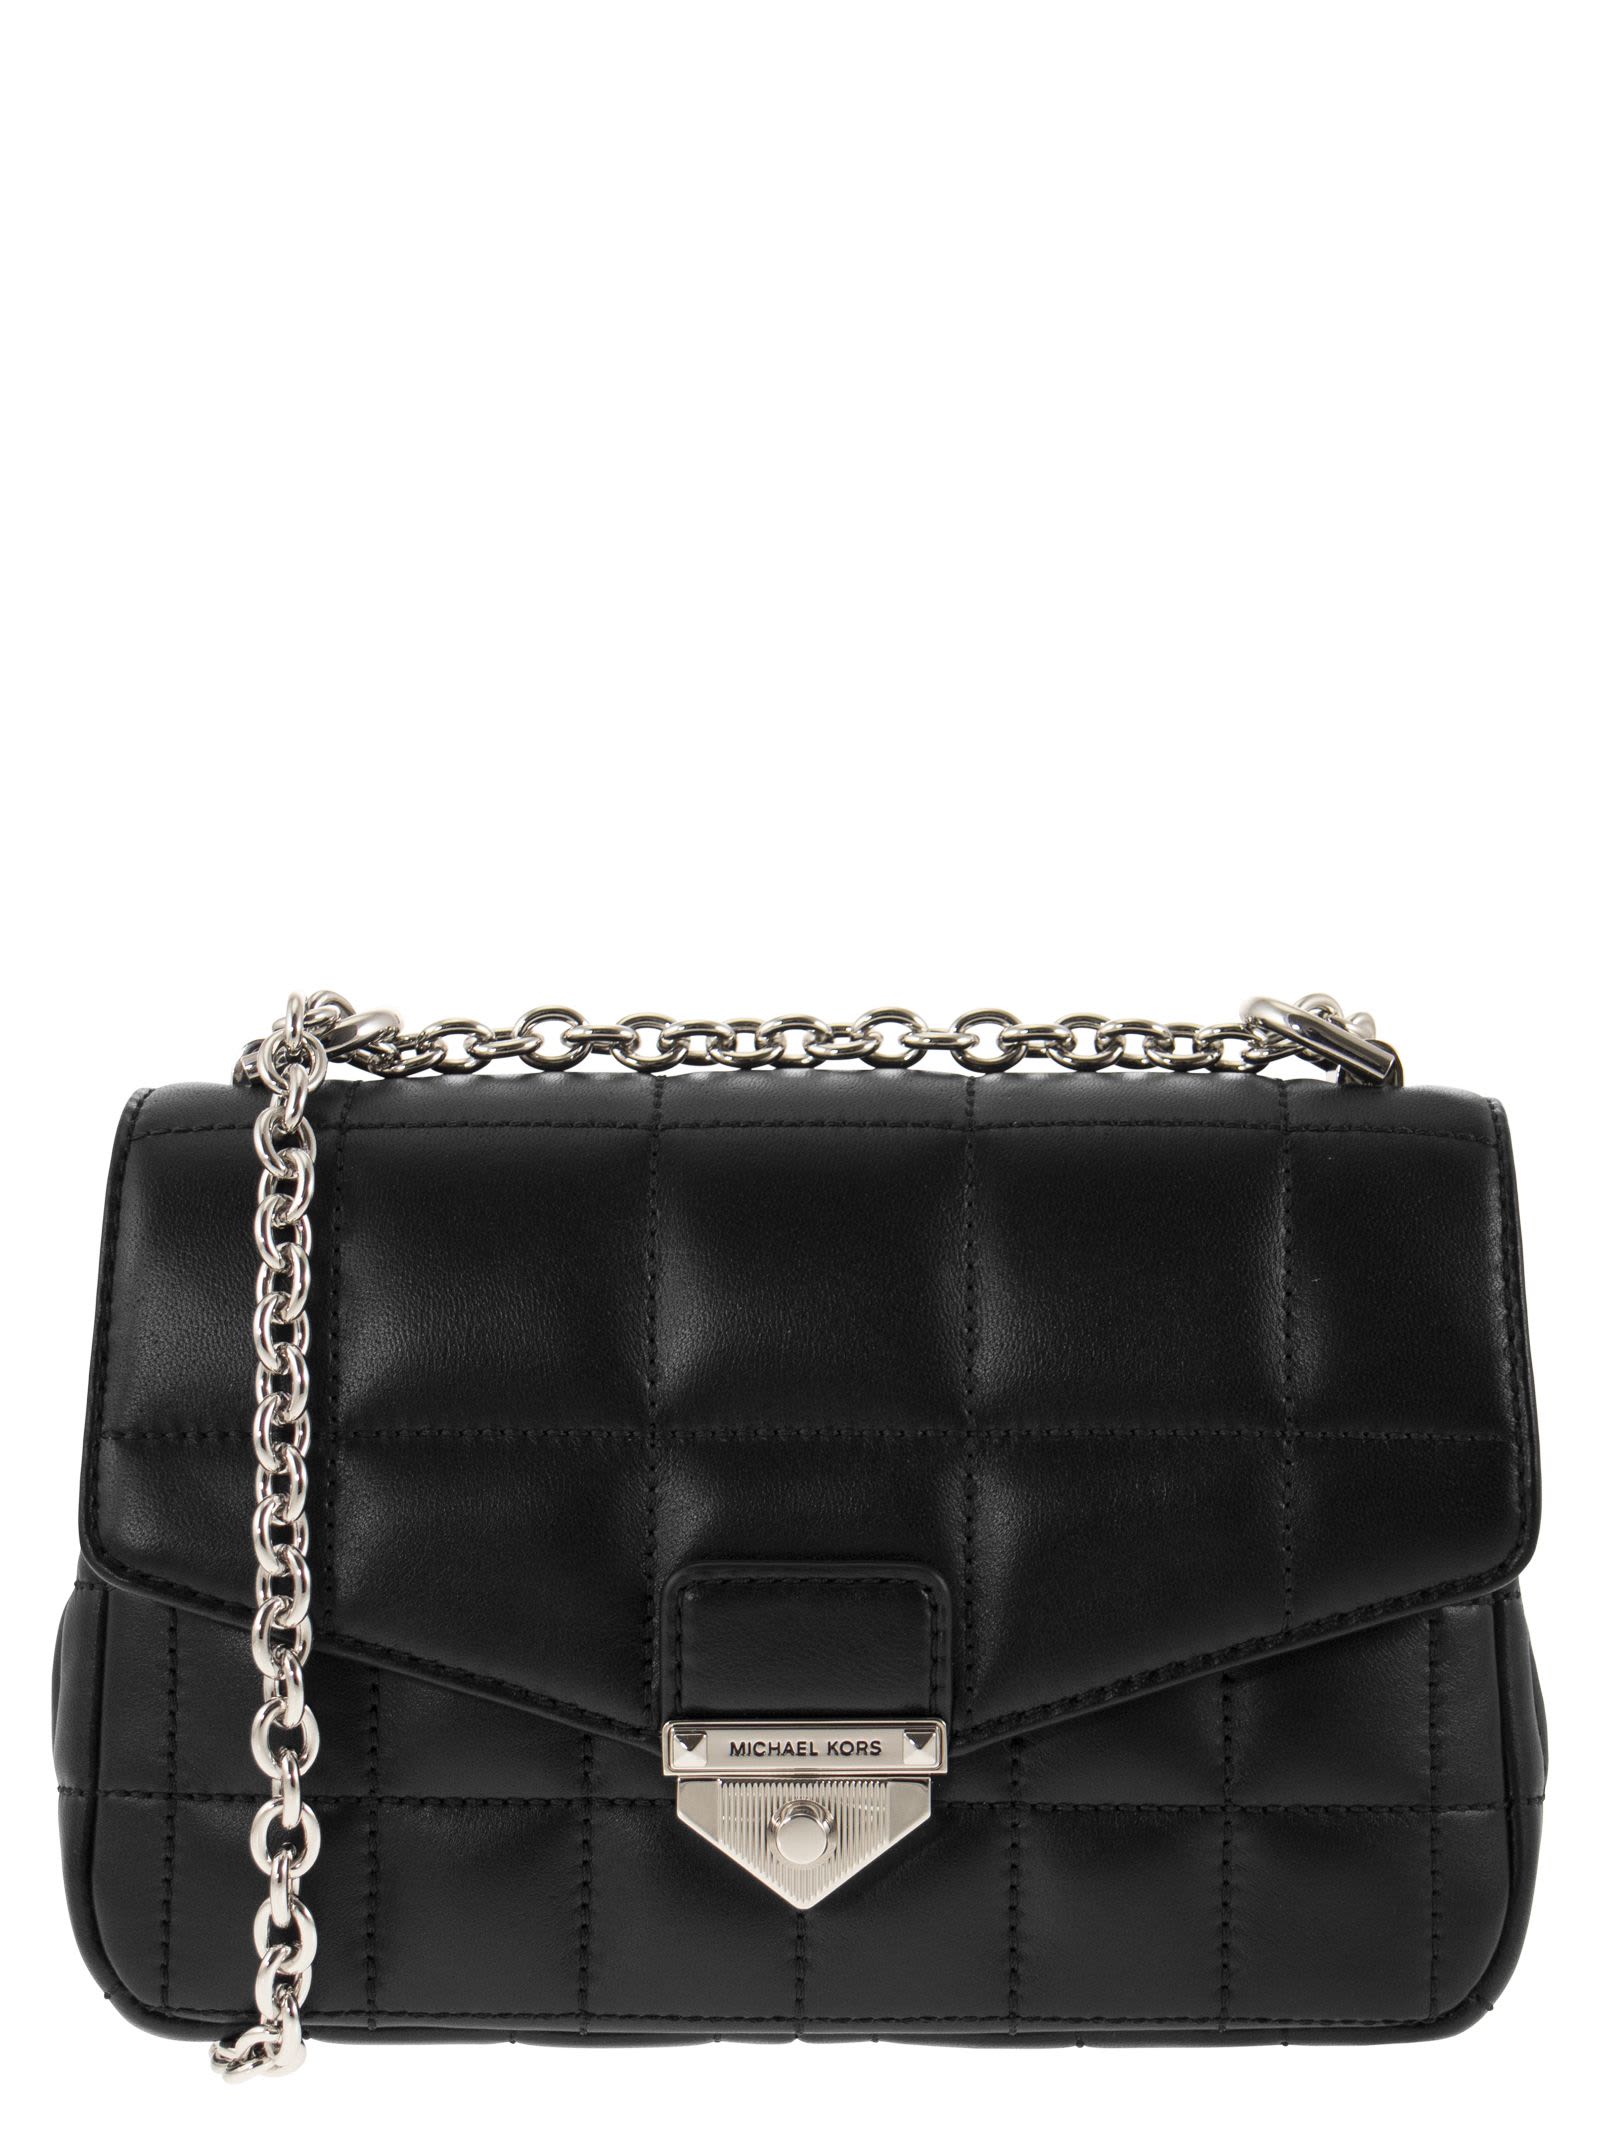 Michael Kors Soho Small Quilted Leather Shoulder Bag In Black